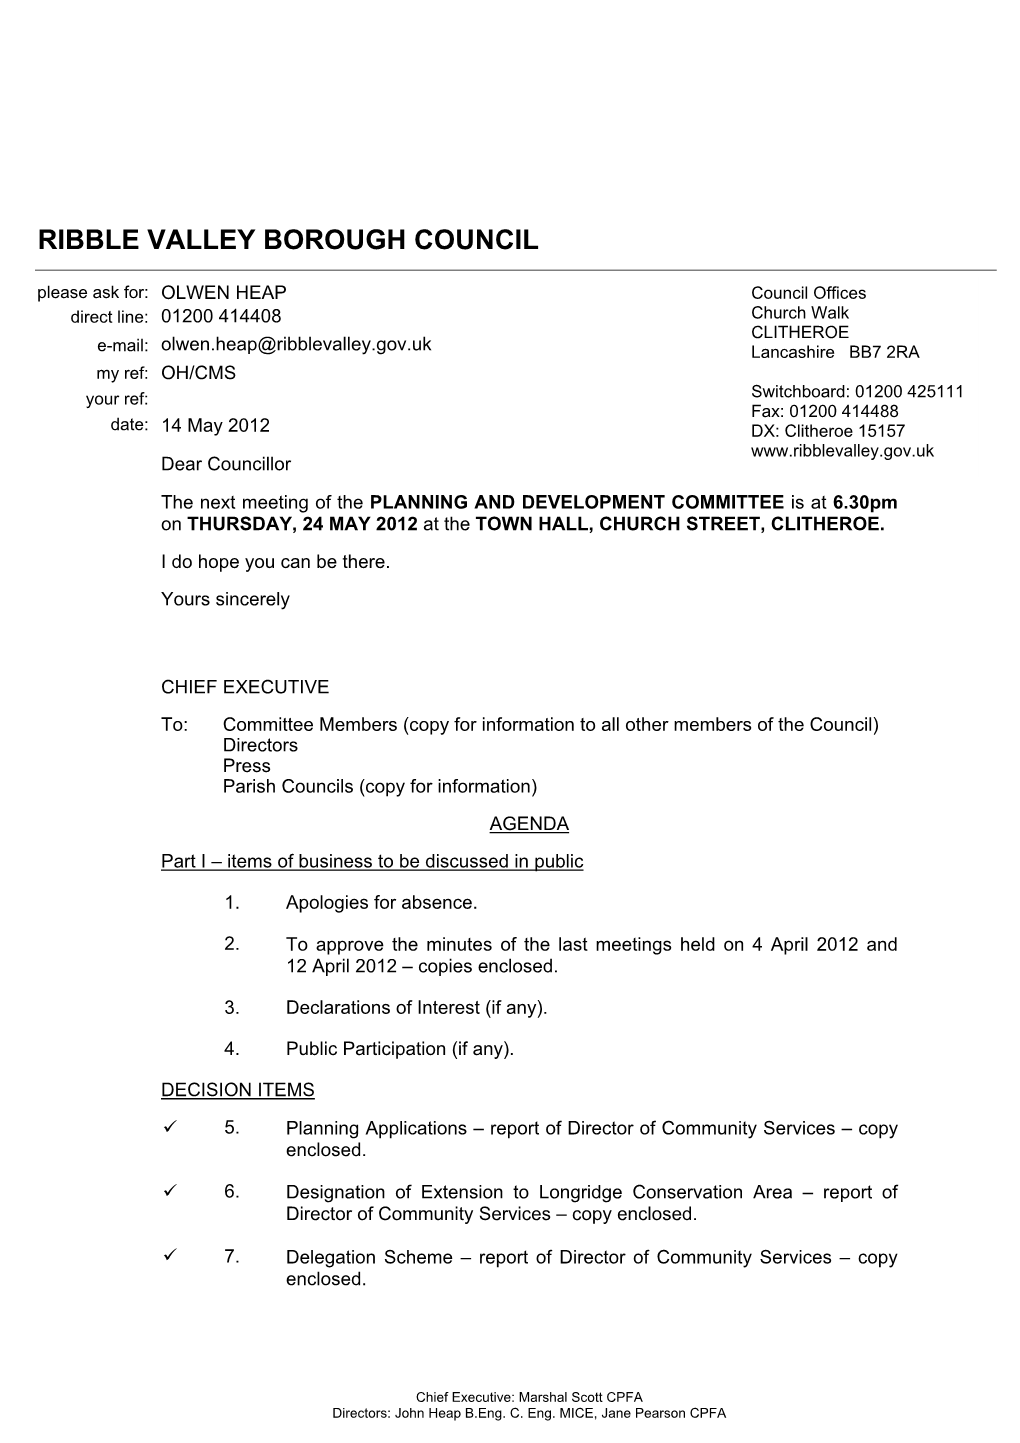 PLANNING and DEVELOPMENT COMMITTEE Agenda Item No Meeting Date: THURSDAY, 24 MAY 2012 Title: PLANNING APPLICATIONS Submitted By: DIRECTOR of COMMUNITY SERVICES